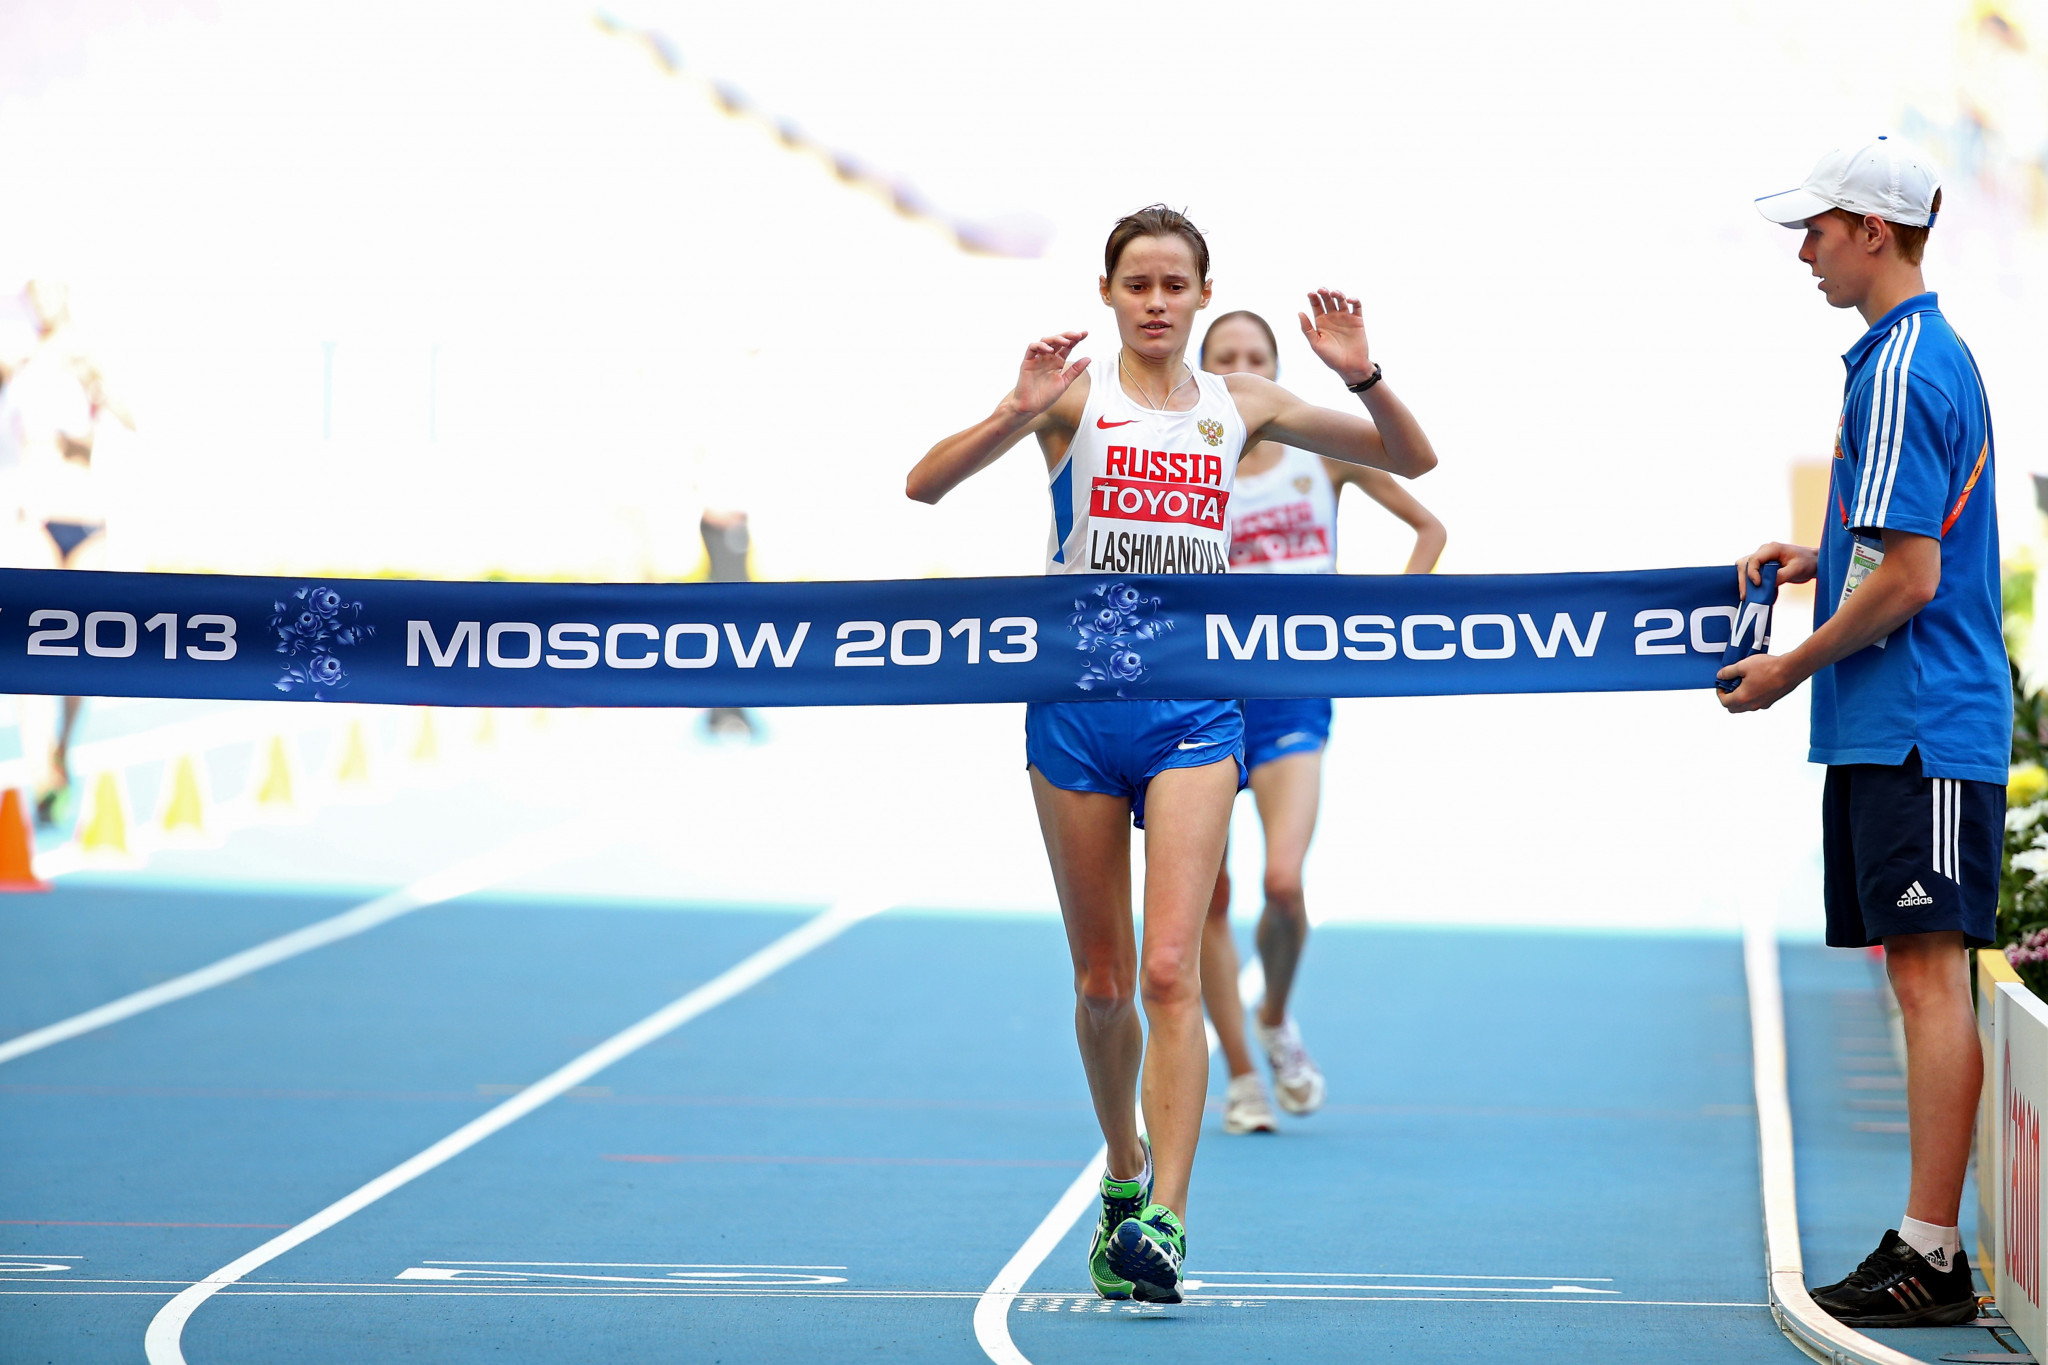 Yelena Lashmanova will also lose her 20km title from the 2013 World Championships in Moscow ©Getty Images